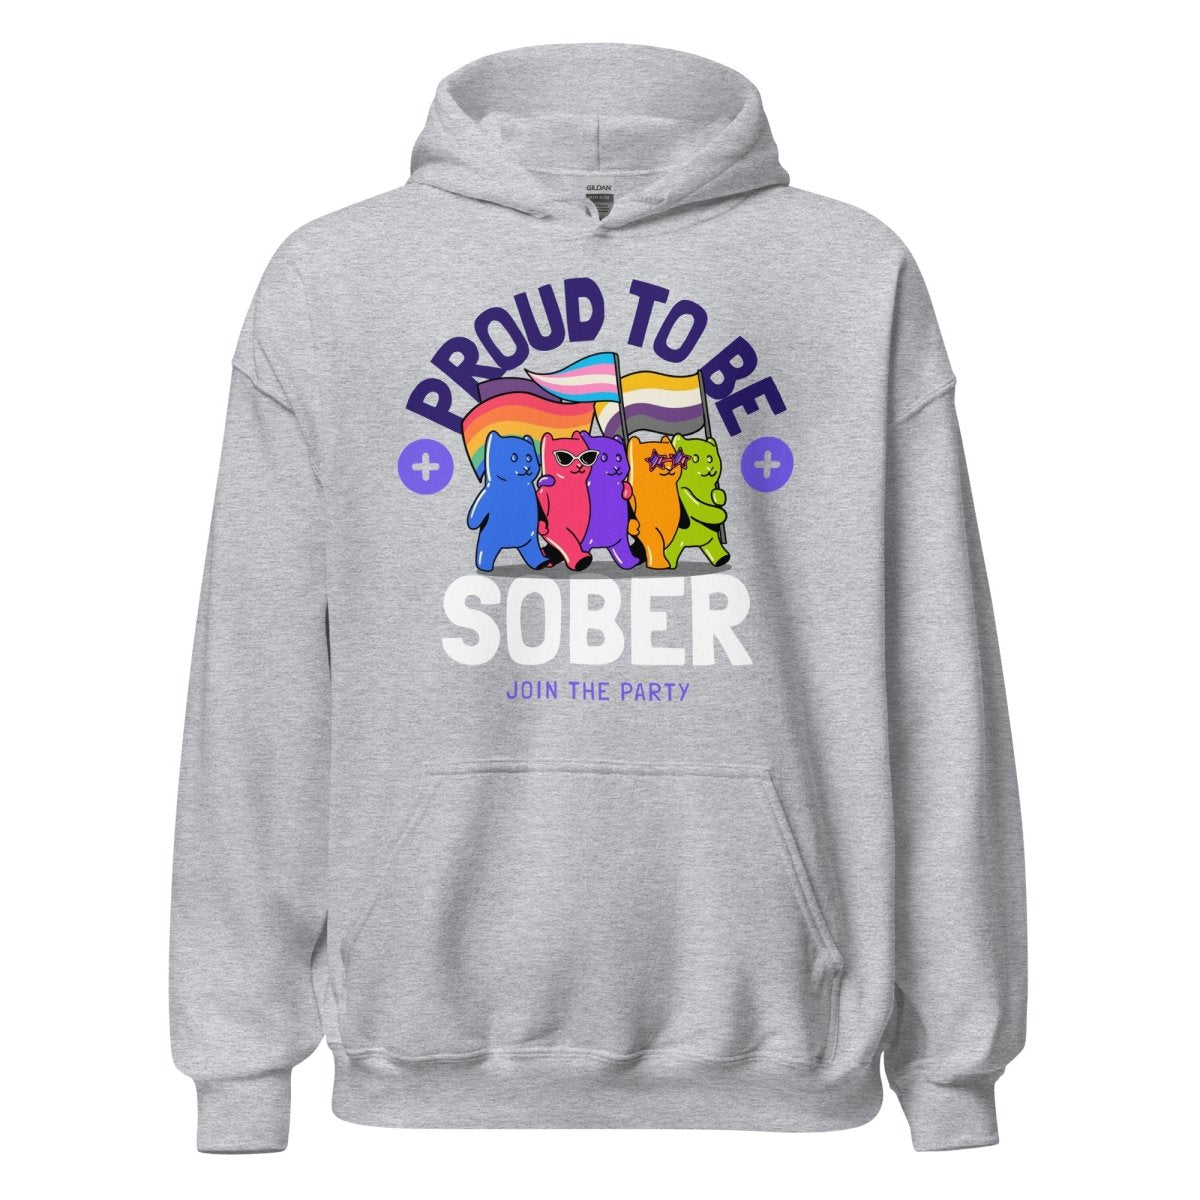 "Proud to be Sober" Unisex Hoodie - Rainbow Resilience Collection - Sport Grey / S | Sobervation